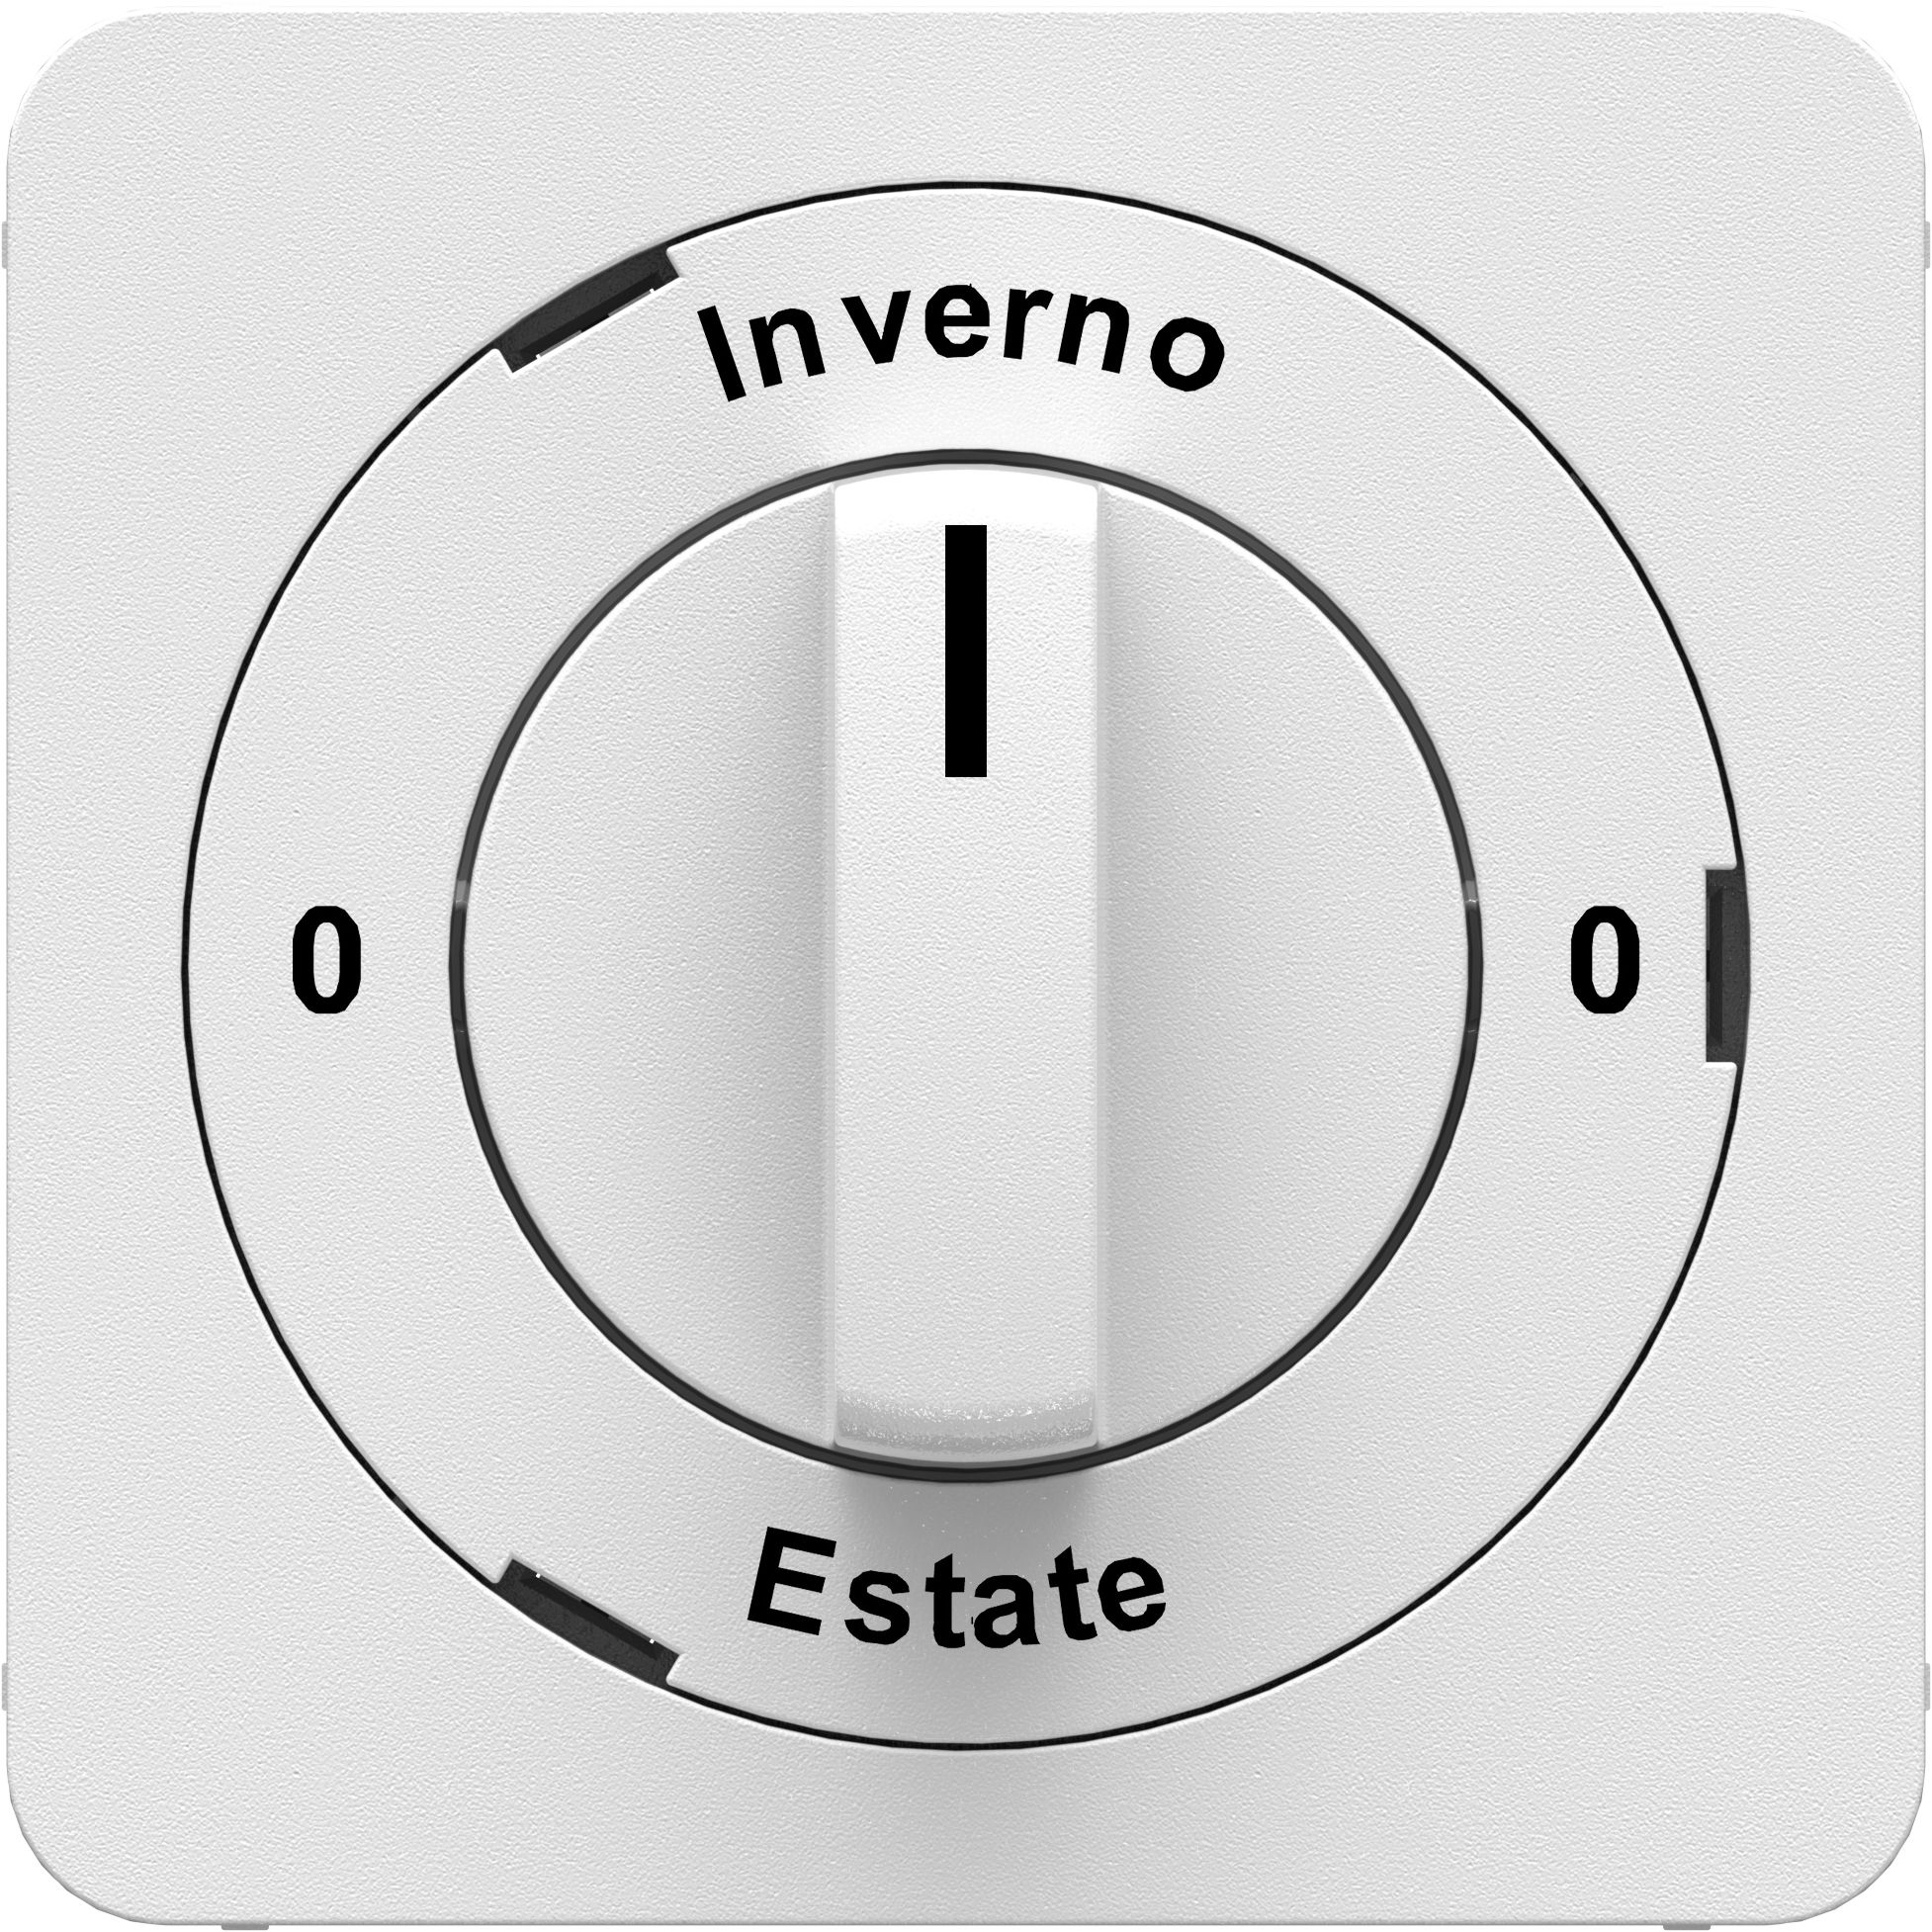 Front plates for turnable switch 0-Inverno-0-Estate white